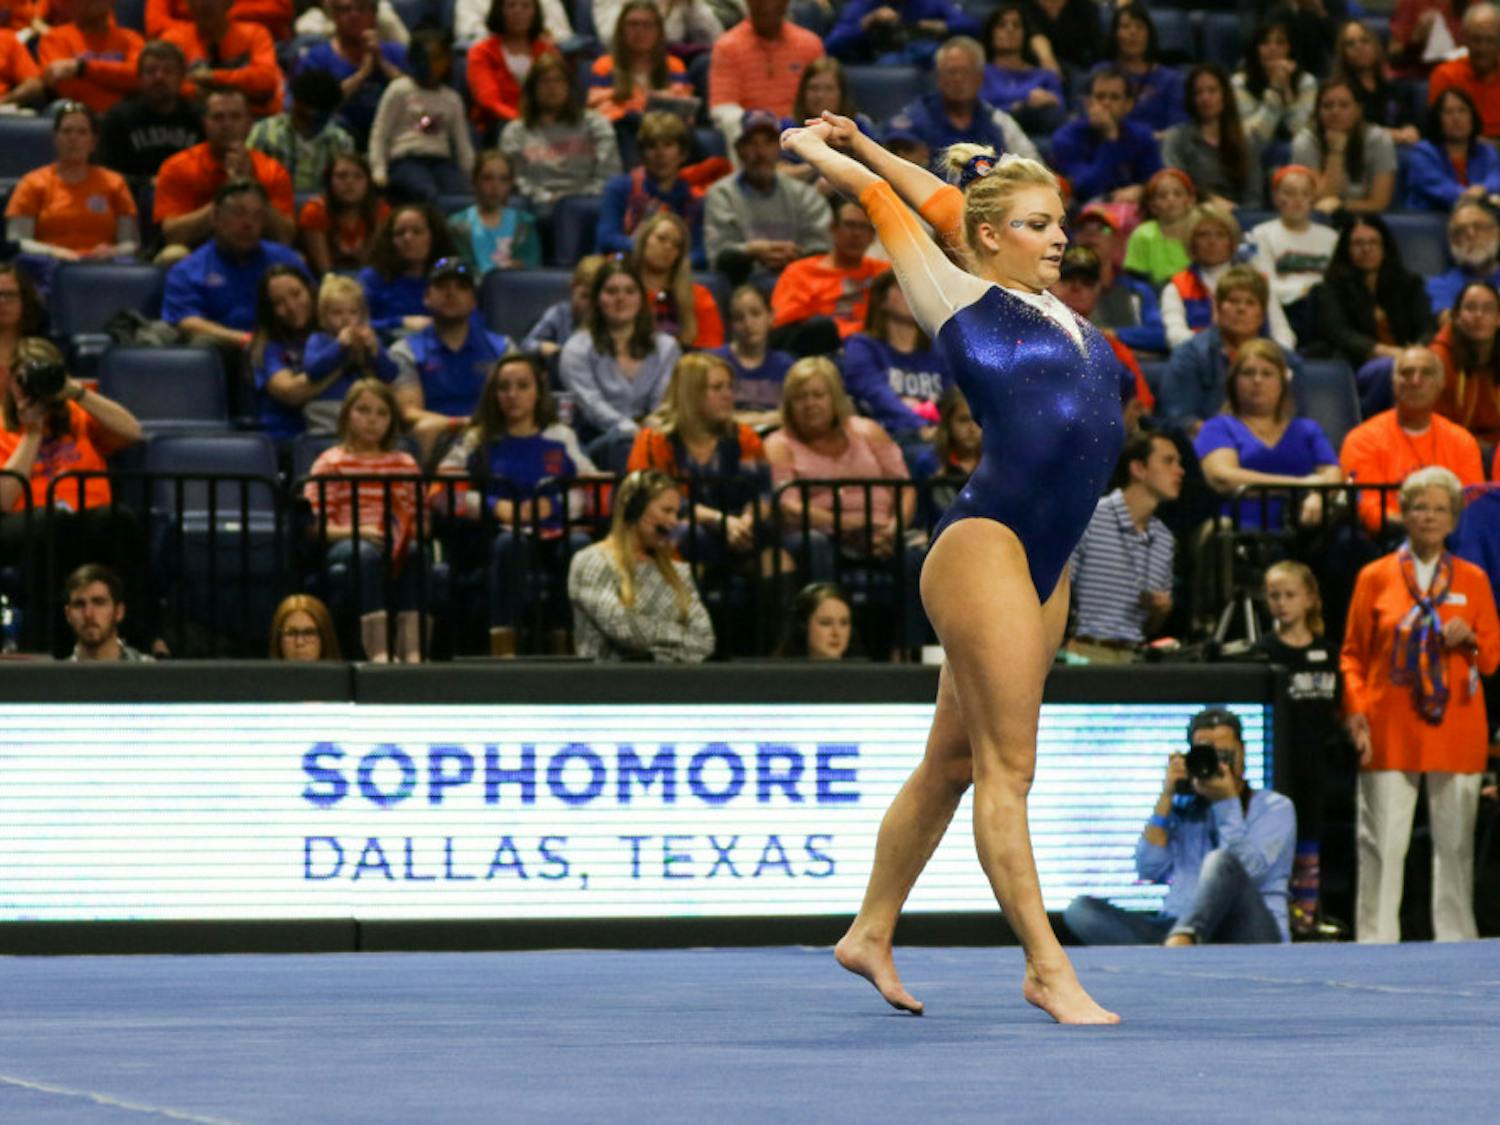 Sophomore gymnast Alyssa Baumann will go toe-to-toe with her sister, UGA freshman Rachel Baumann, tonight when the Gators host the Bulldogs in the O’Connell Center at 6:45.
&nbsp;